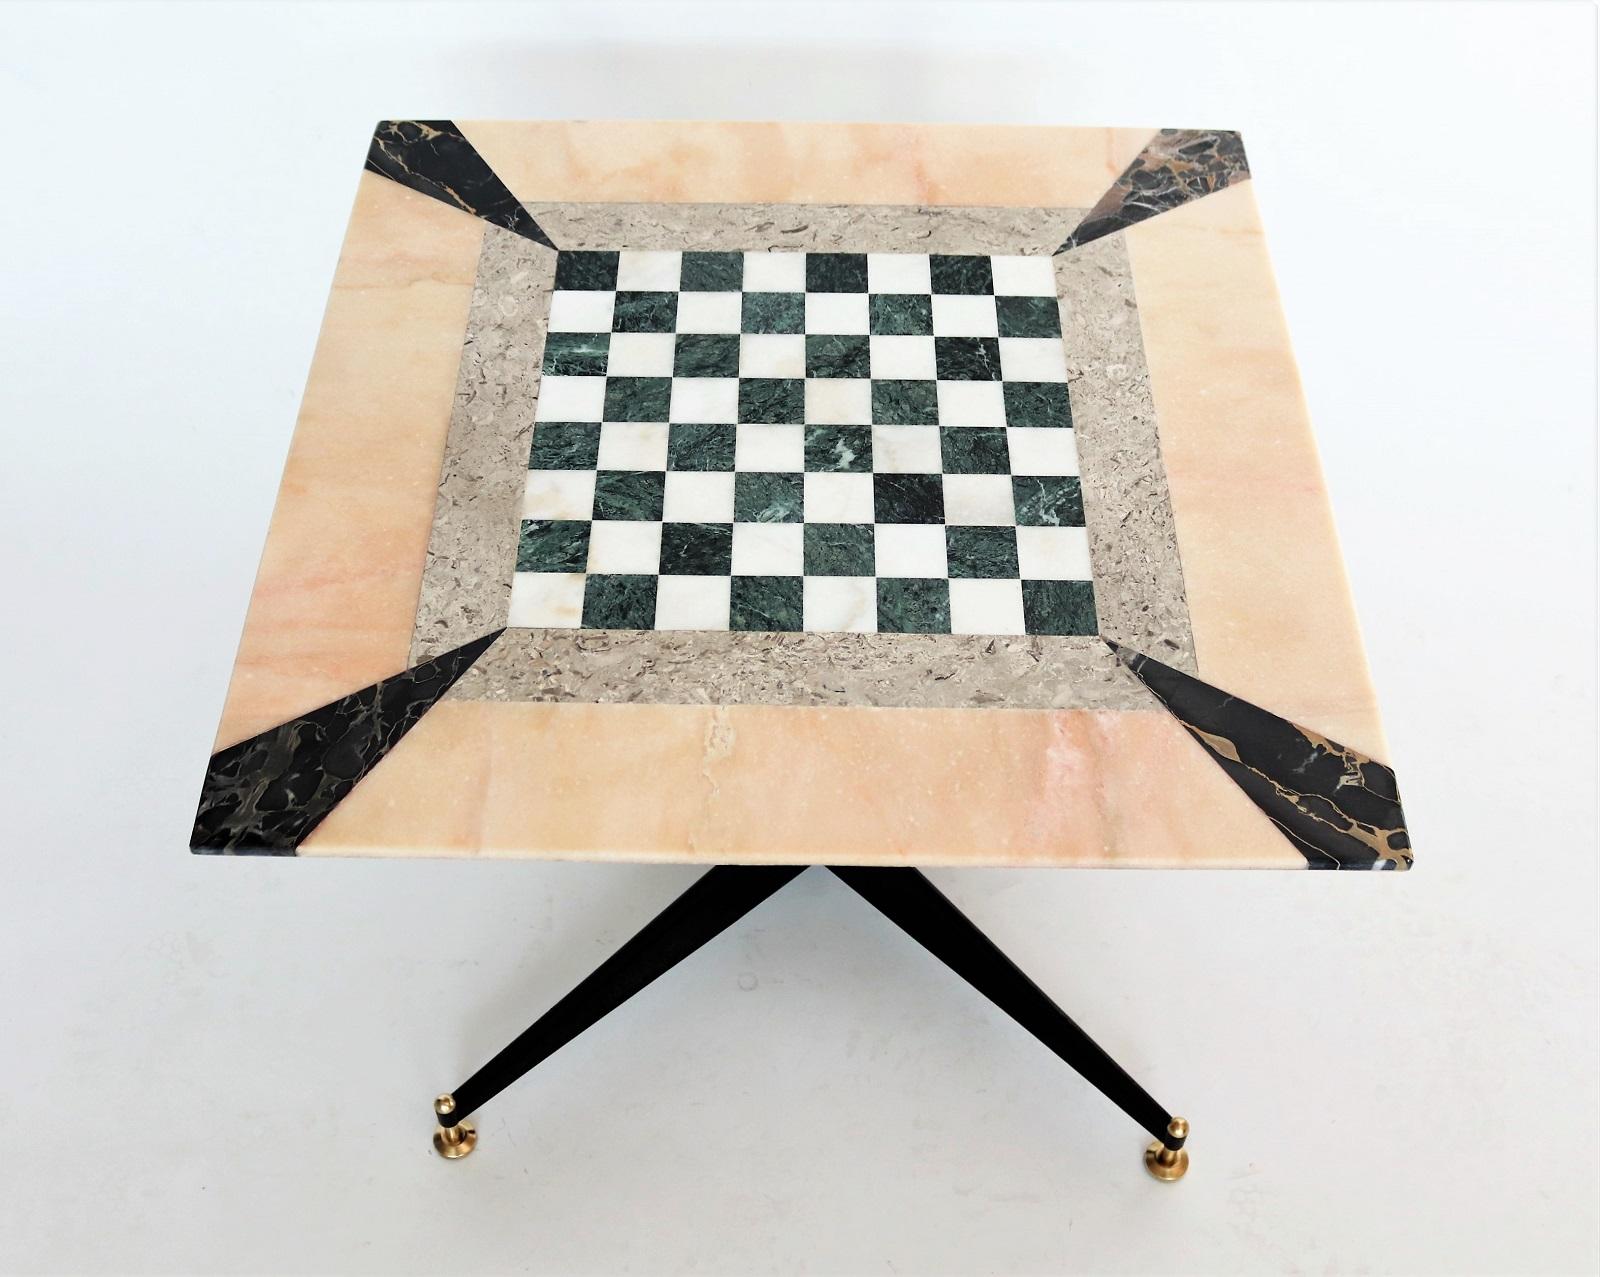 Stunning coffee table or gaming table made in Italy in the 1950s with original metal base with brass tips.
The marble mosaic have been fixed completely on Travertine marble base, the table top is made of different marble types: Portoro marble (one